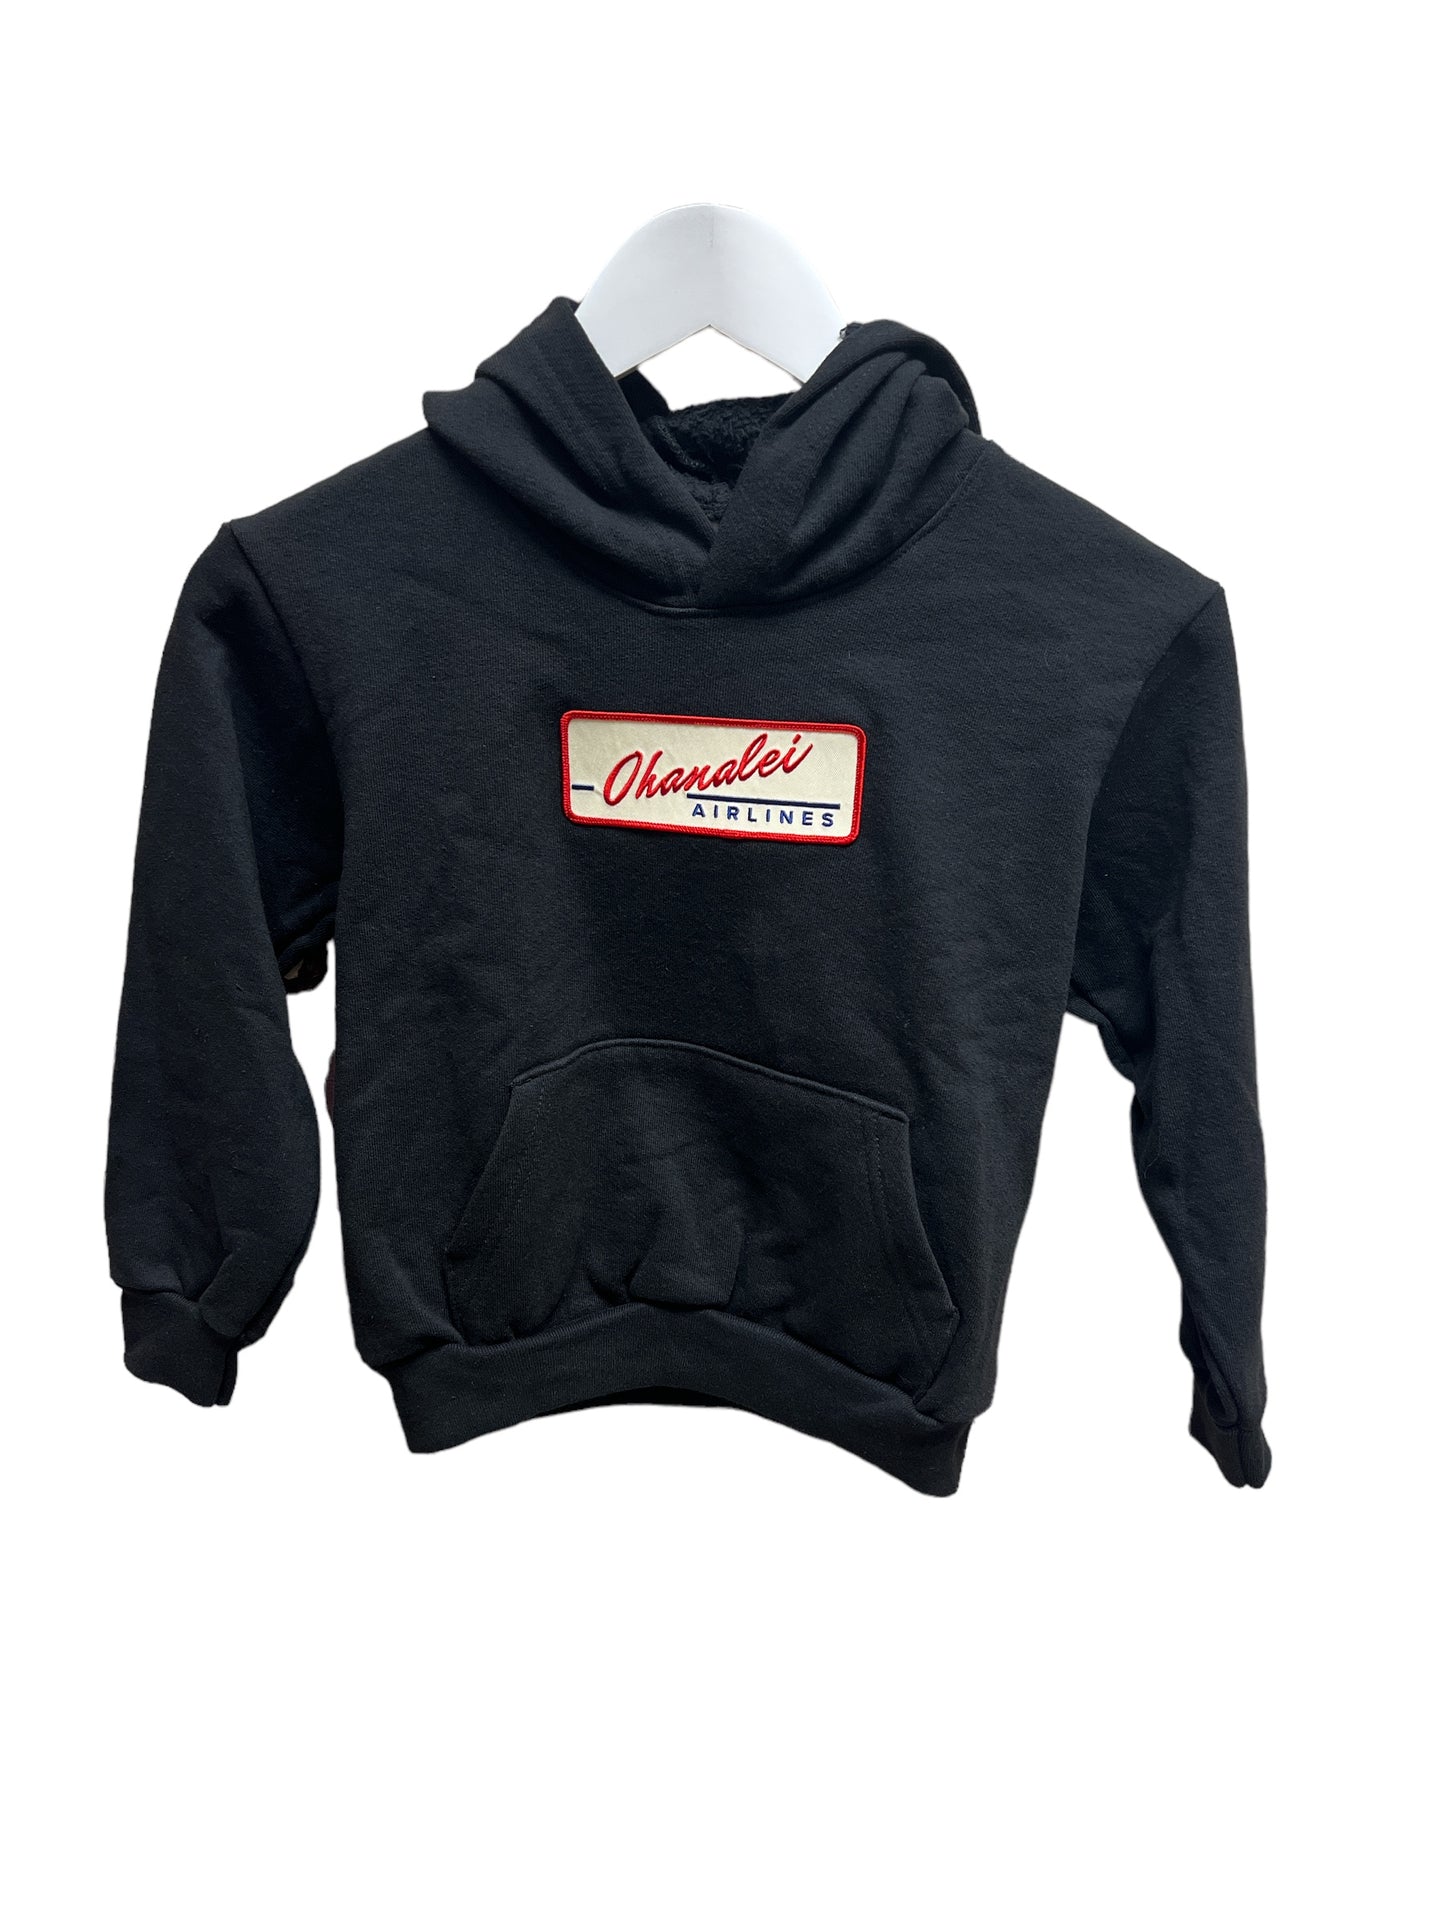 KIDS Ohanalei Airlines - LARGE Patch Hoodie “Black”